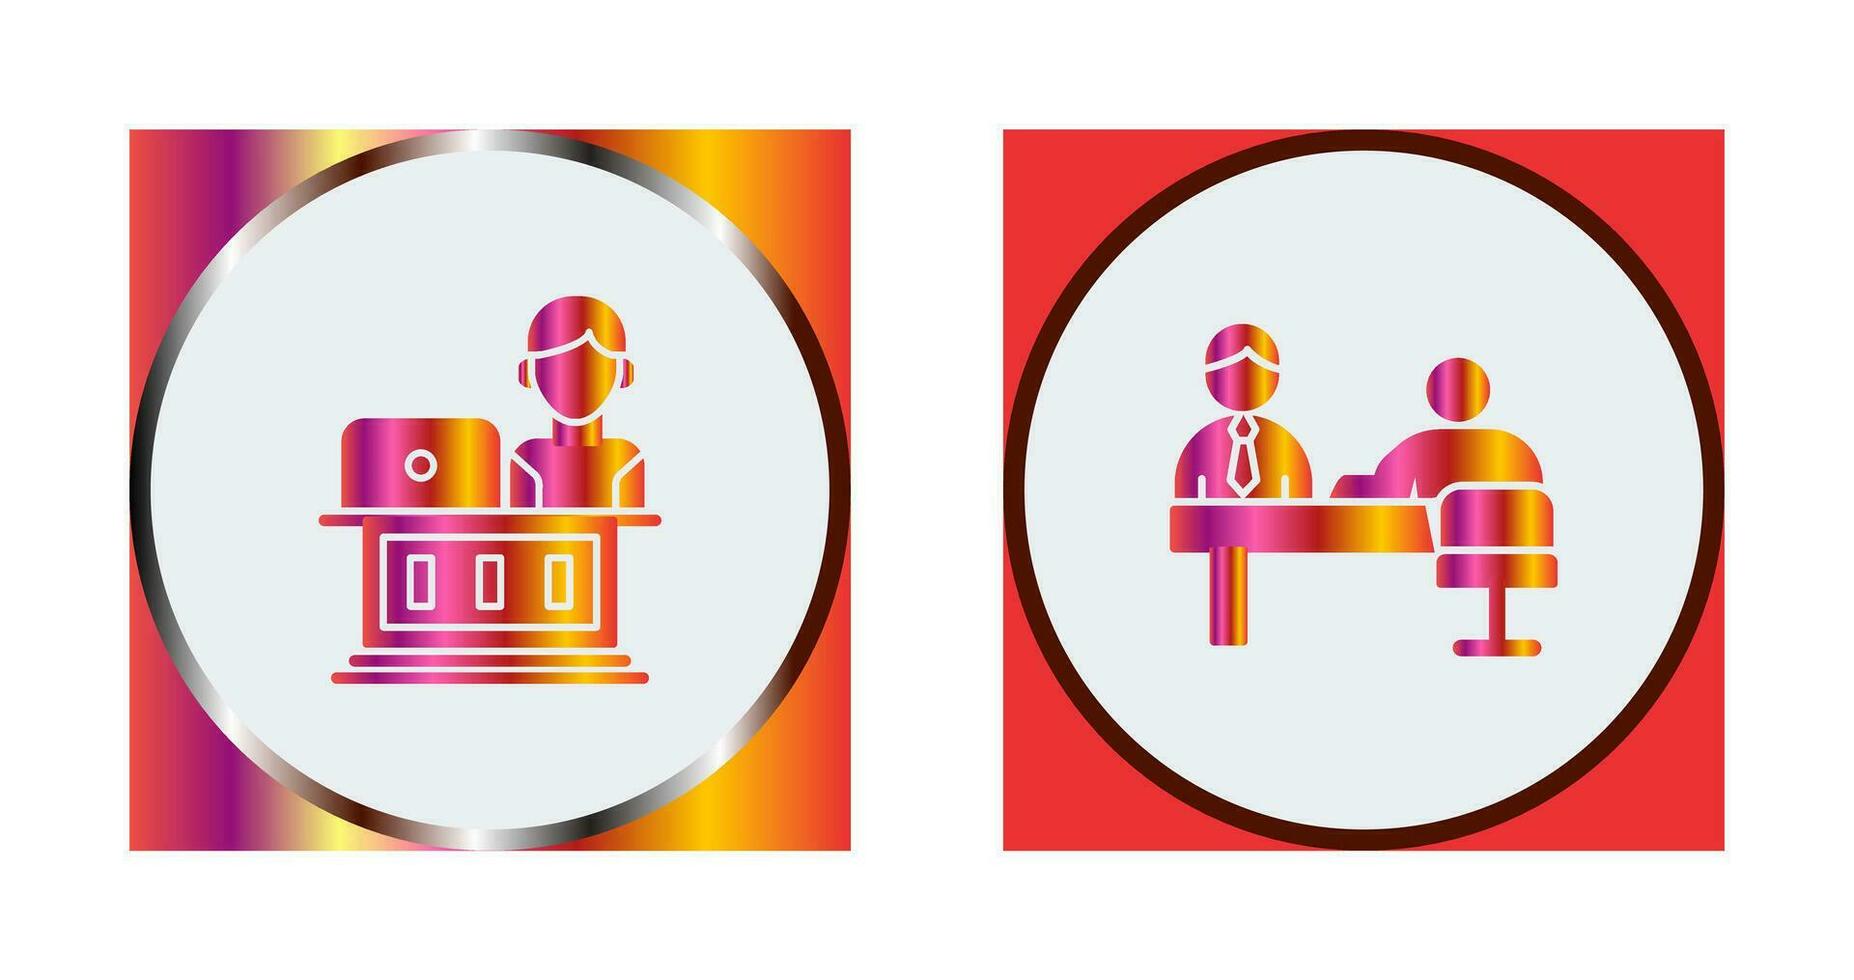 Employee and Evaluating work Icon vector